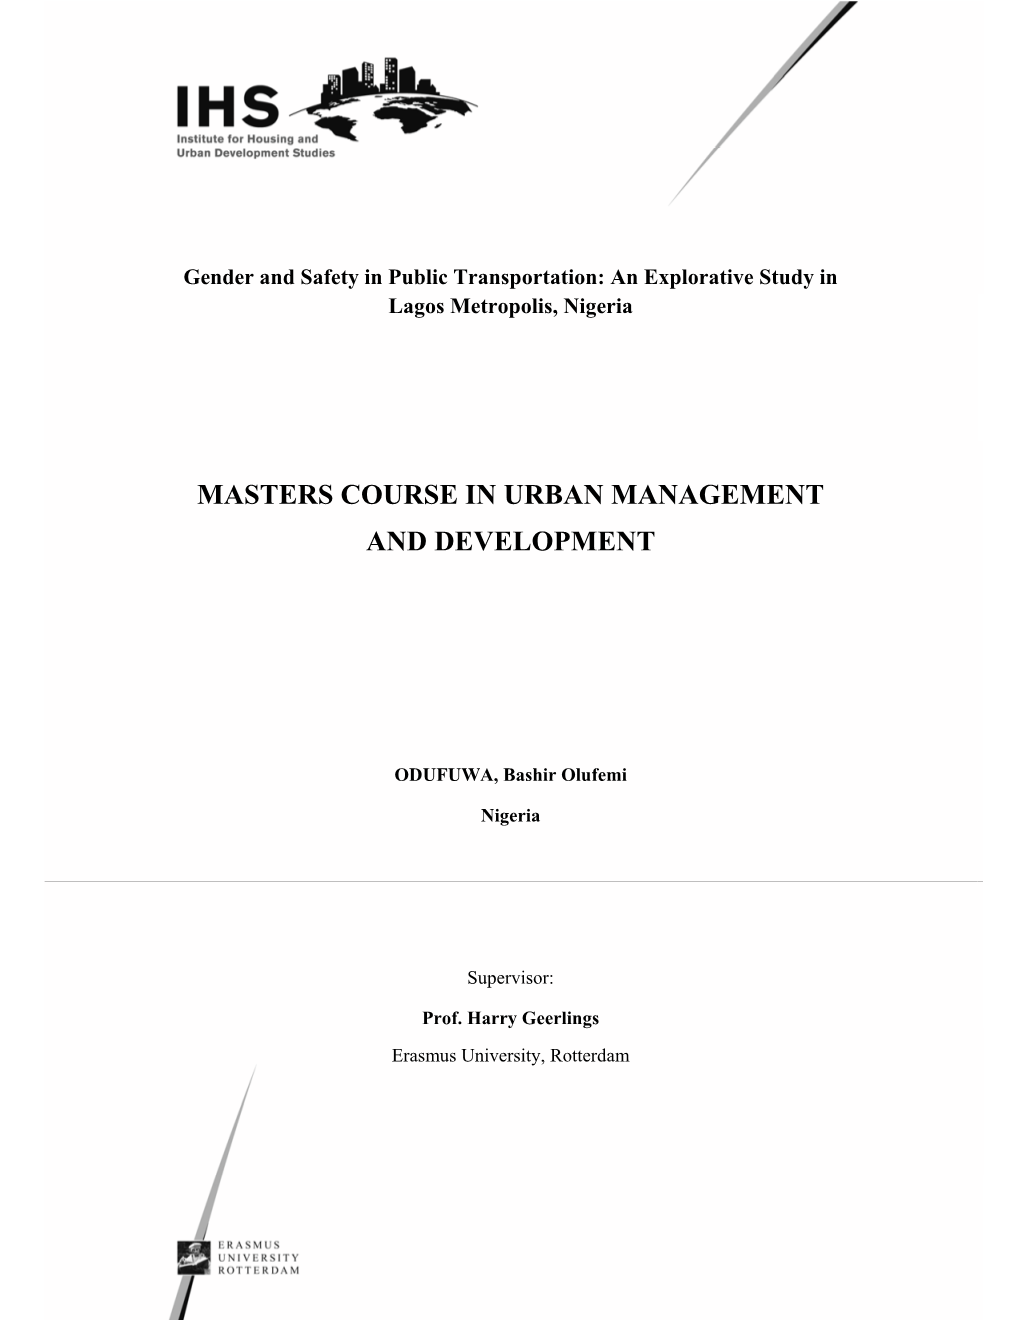 Masters Course in Urban Management and Development